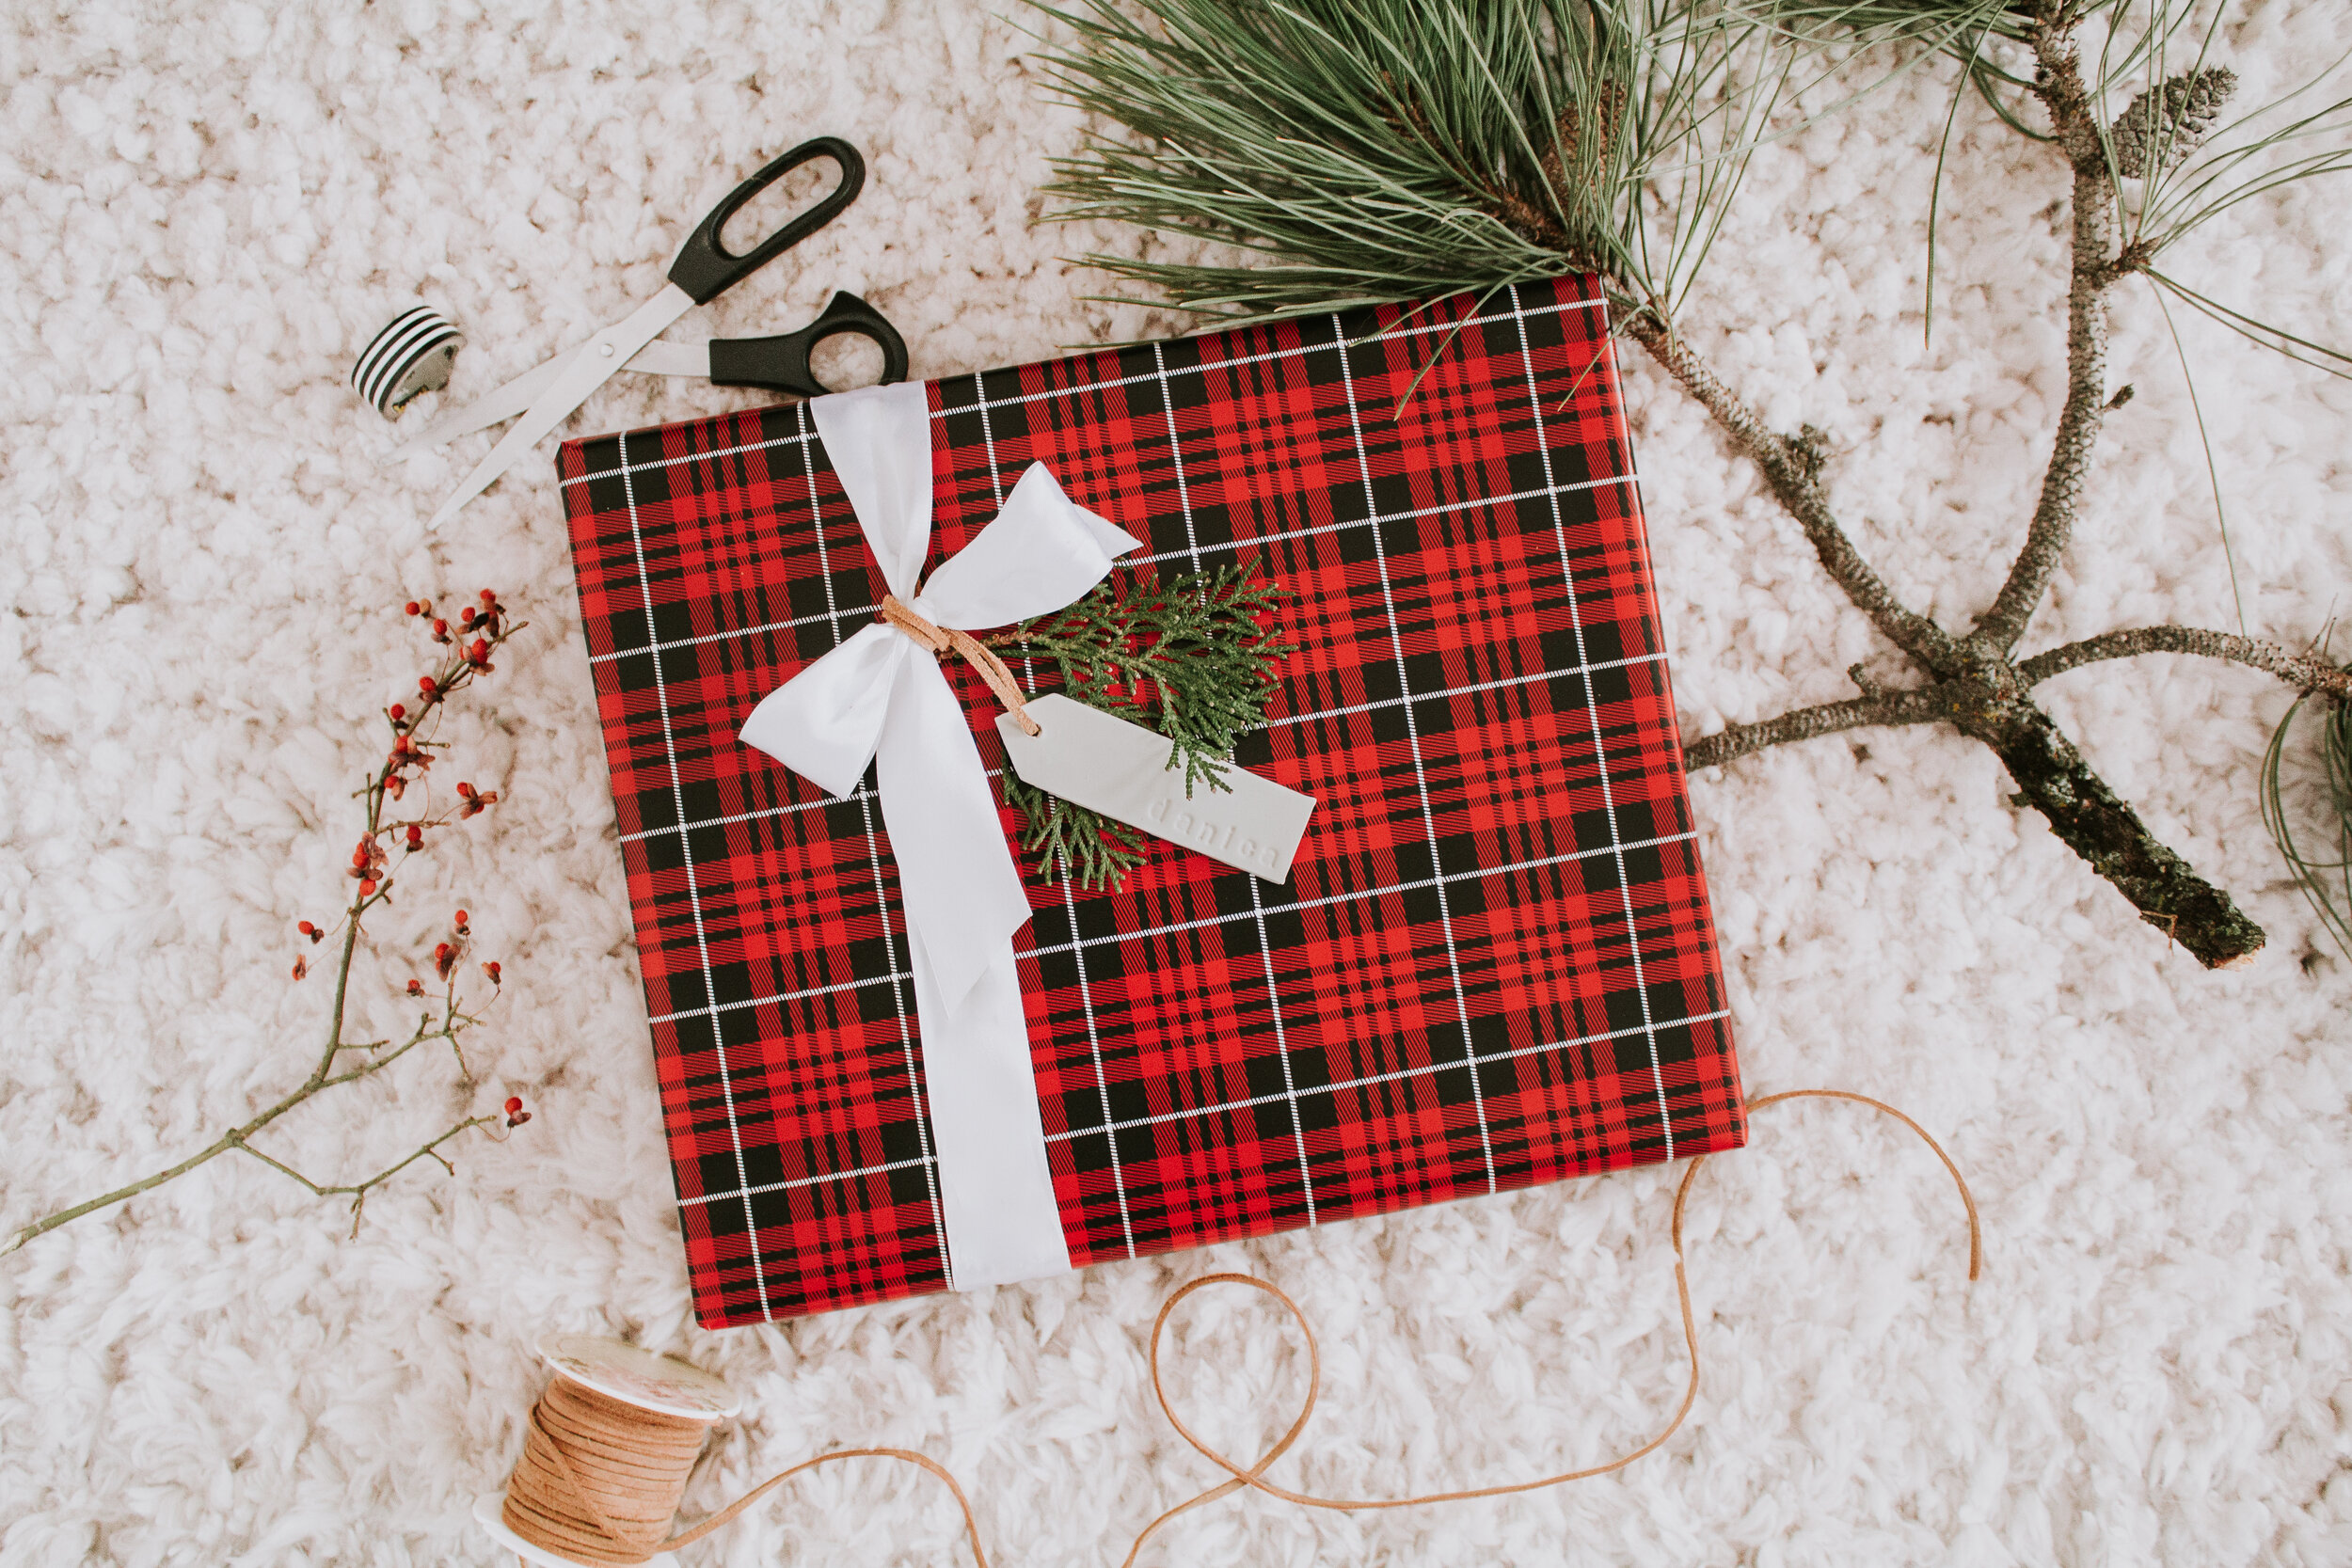 The High/Low List by Nadine Stay - Christmas Edition. Candlesticks, stockings, wrapping paper, slippers, Christmas trees, and tree collars. Look-alike Christmas essentials for less.